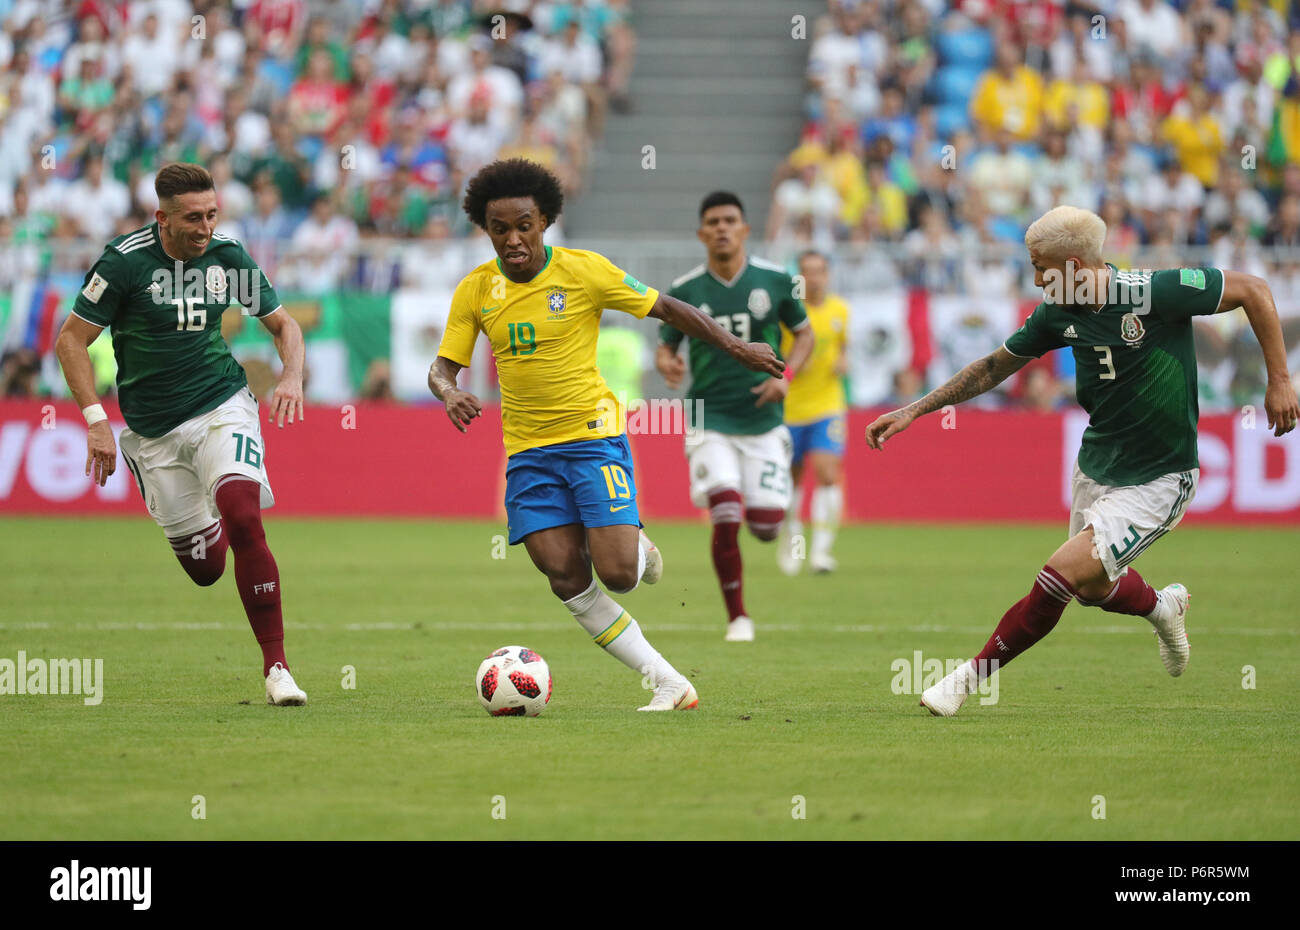 Samara, Russia. 02nd July, 2018. Soccer, World Cup 2018, Final round - round of 16: Mexico vs. Brazil at the Samara stadium: Brazil's Willian (C) and Mexico's Hector Herrera (L) and Carlos Salcedo vying for the ball. Credit: Christian Charisius/dpa/Alamy Live News Stock Photo